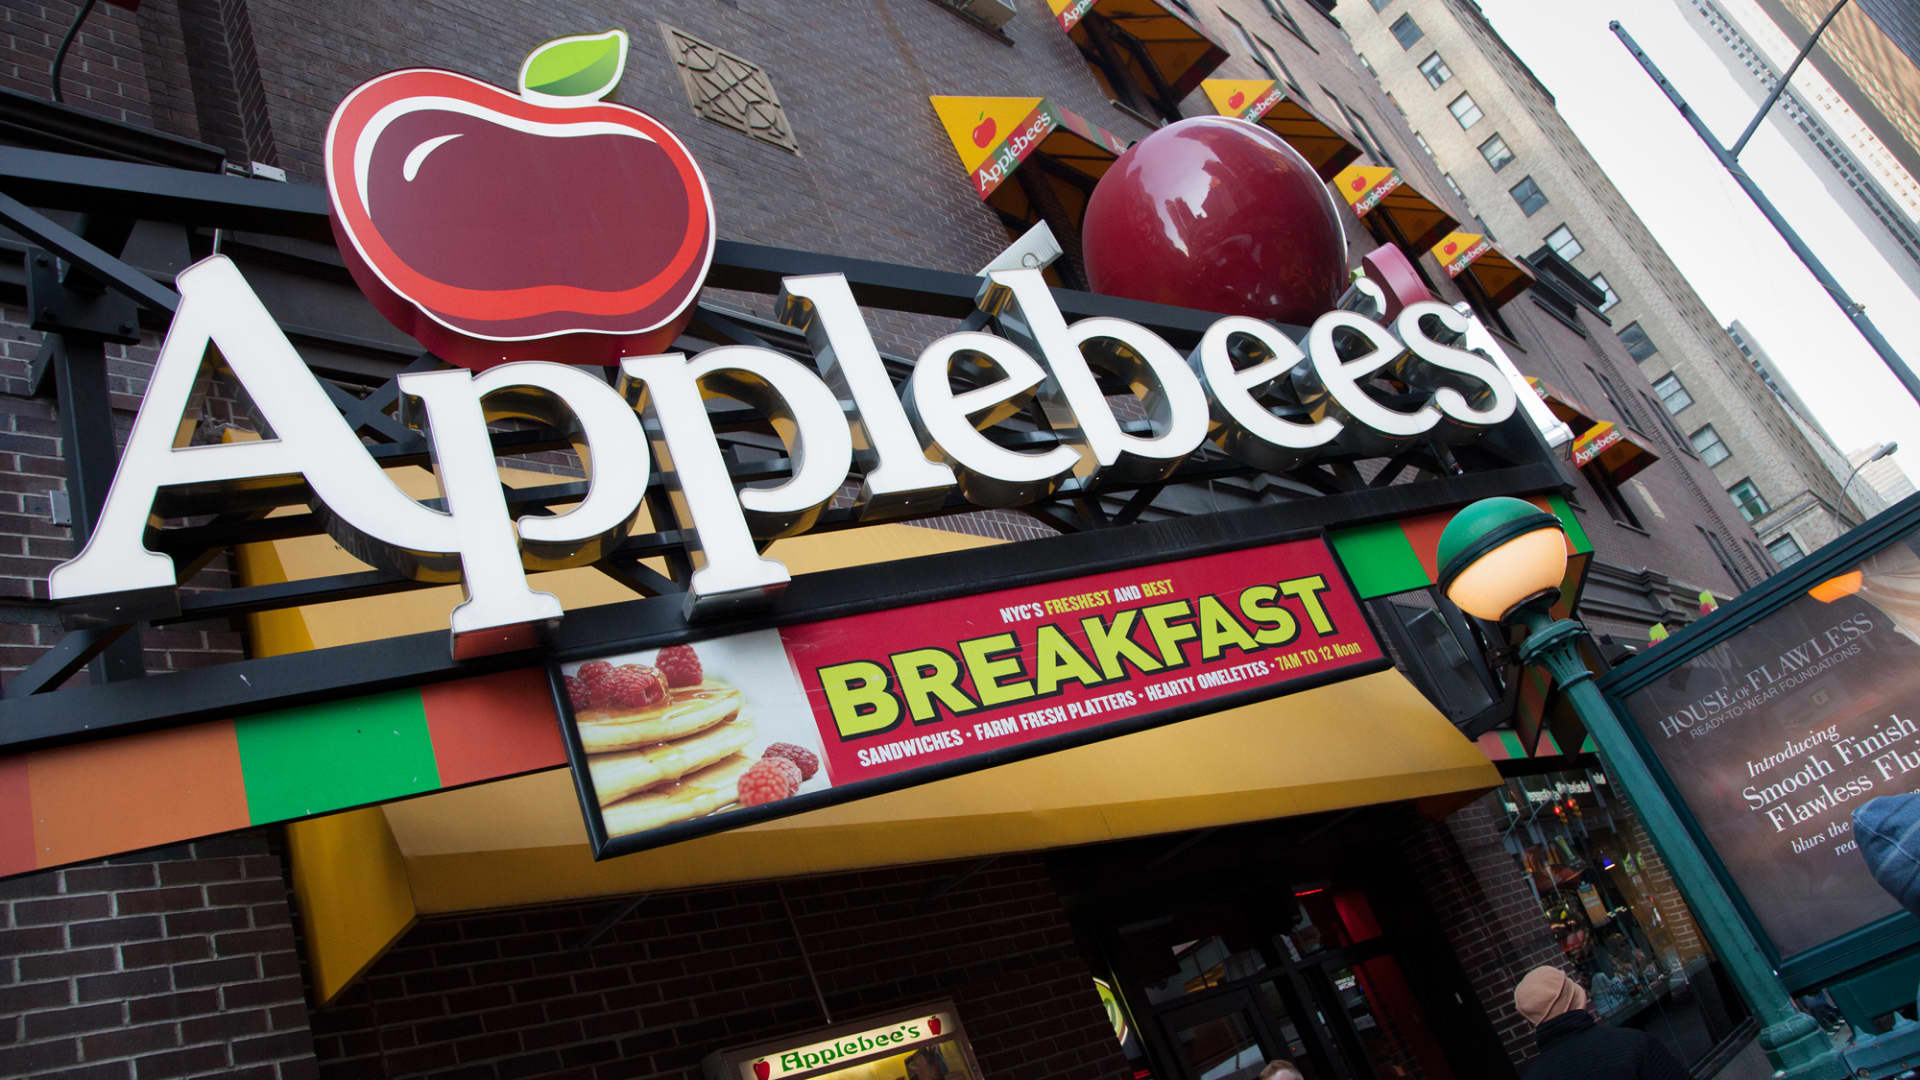 Applebee’s owner Dine Brands wants to steal fast-food customers with its deals